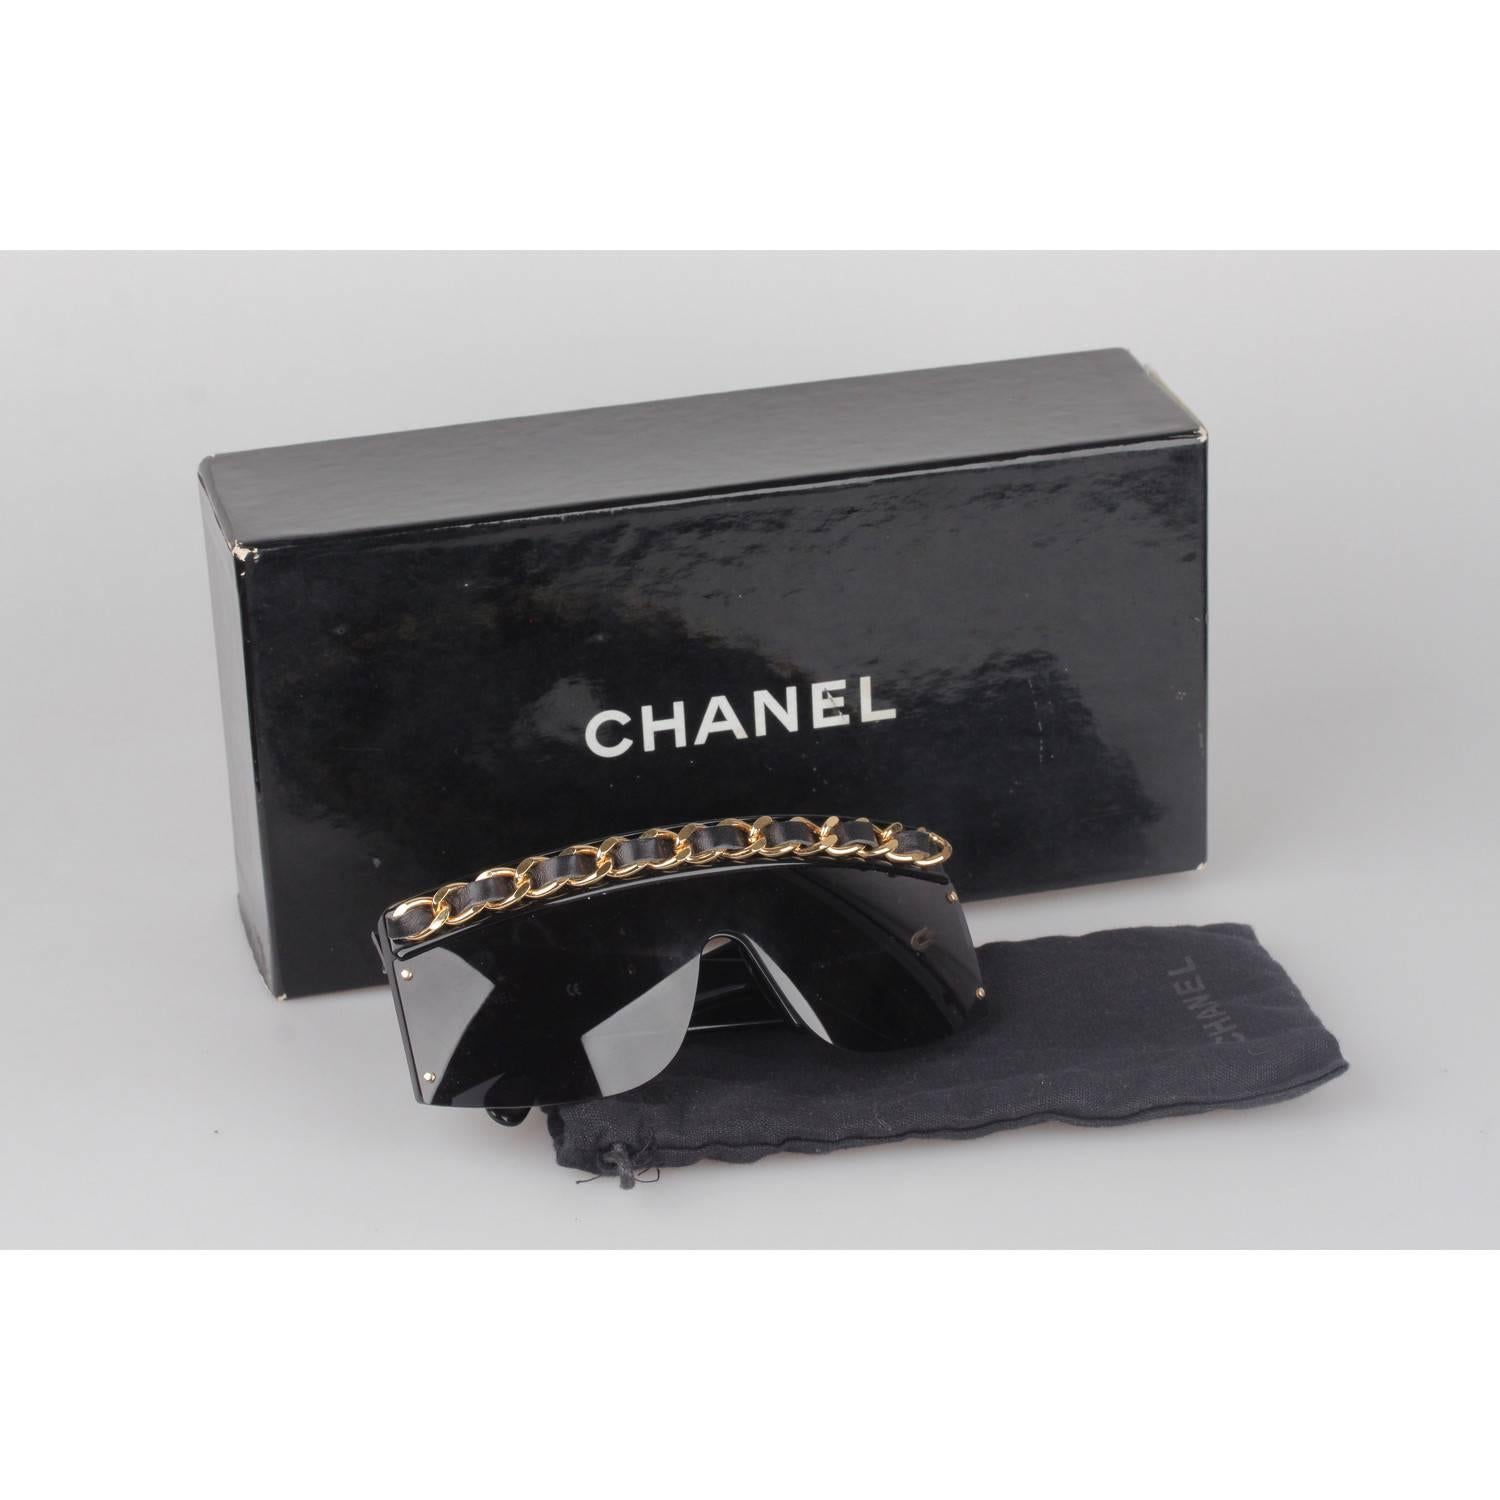 Super Rare 1990s DIVA Chanel Sunglasses
This model was worn by Lady Gaga
Mask shaped, with gold metal & black leather classic CHANEL chain starting from the arms, all the way through the front
Model refs: 01455 - 94305
Made in